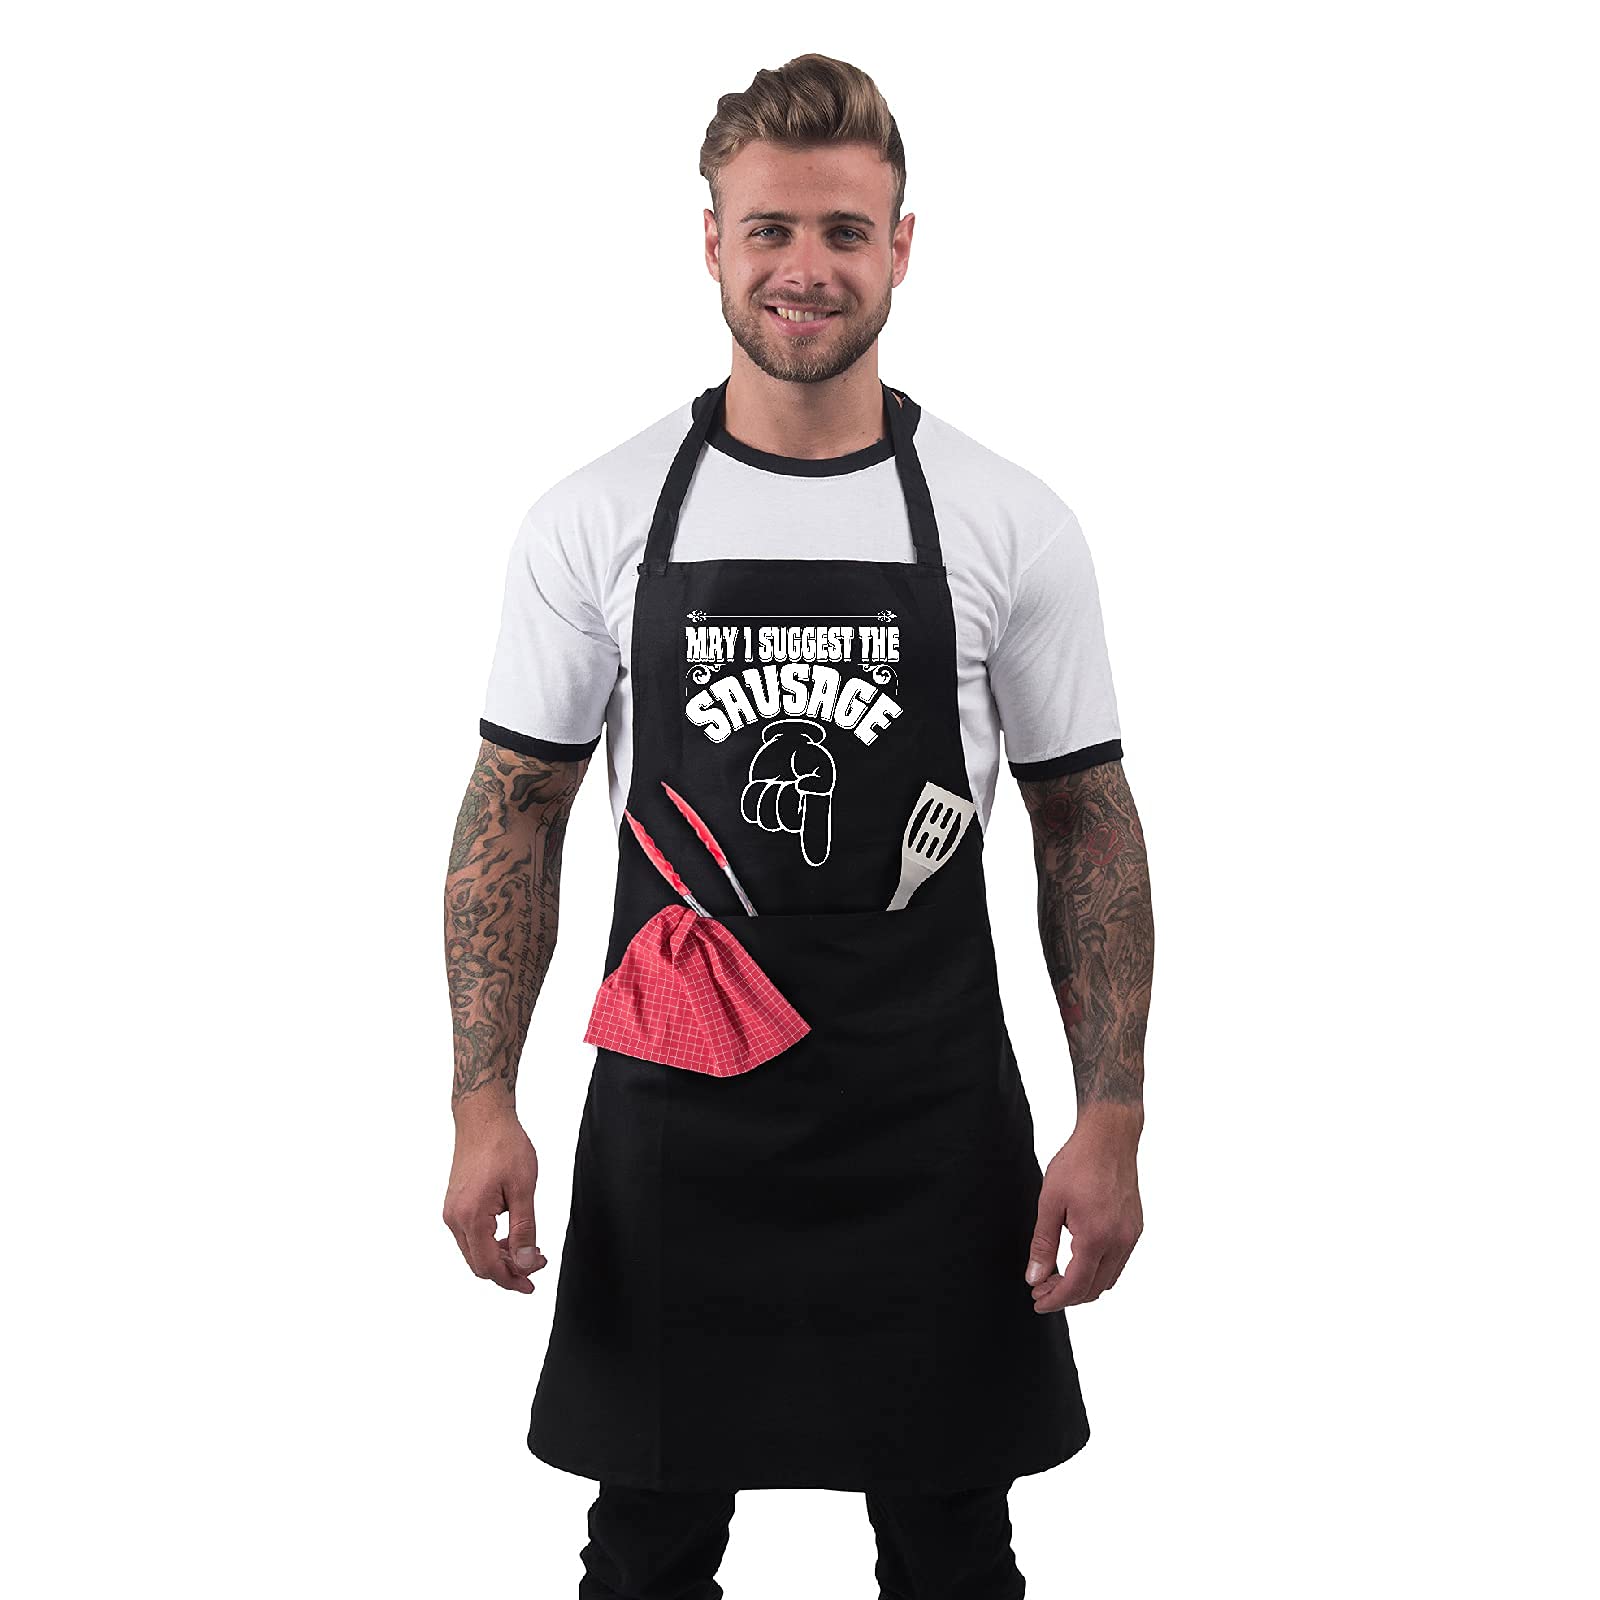 Bang Tidy Clothing Funny Apron Cooking Gifts for Men, Grilling BBQ Grill Cooks Chef Aprons 2 Pockets Cotton, Dad Gifts